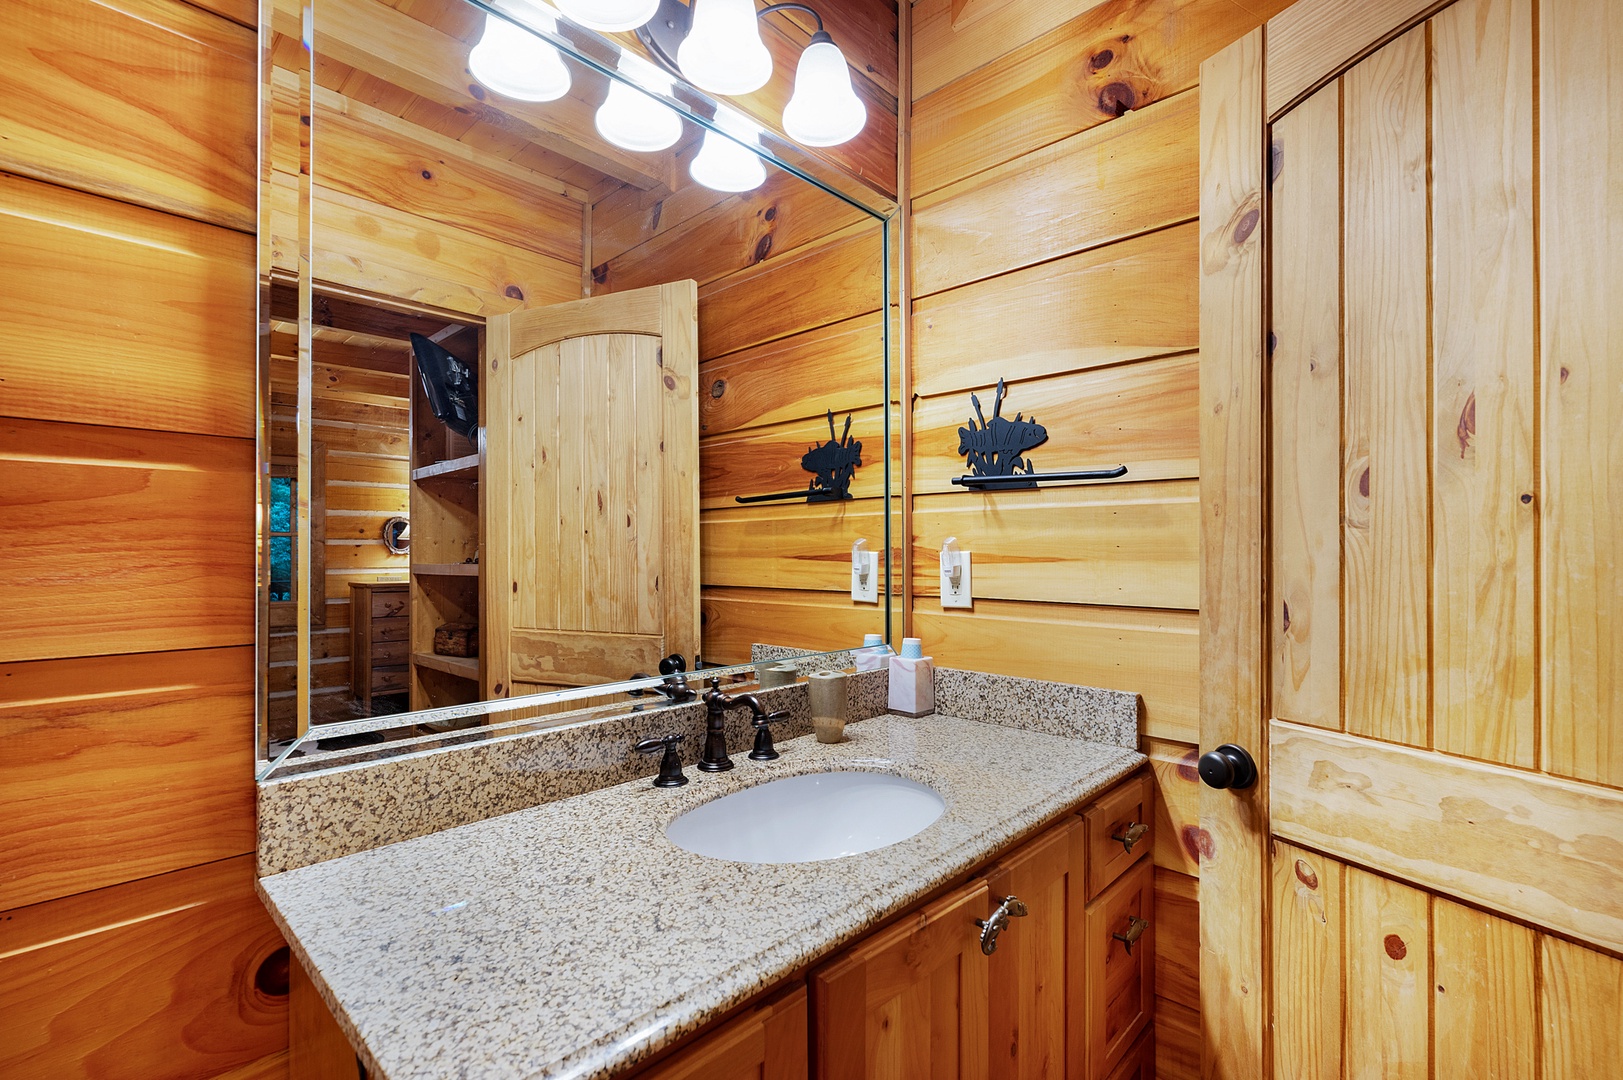 Mountaintown Creek Lodge - Entry Level Guest Bedroom's Bathroom